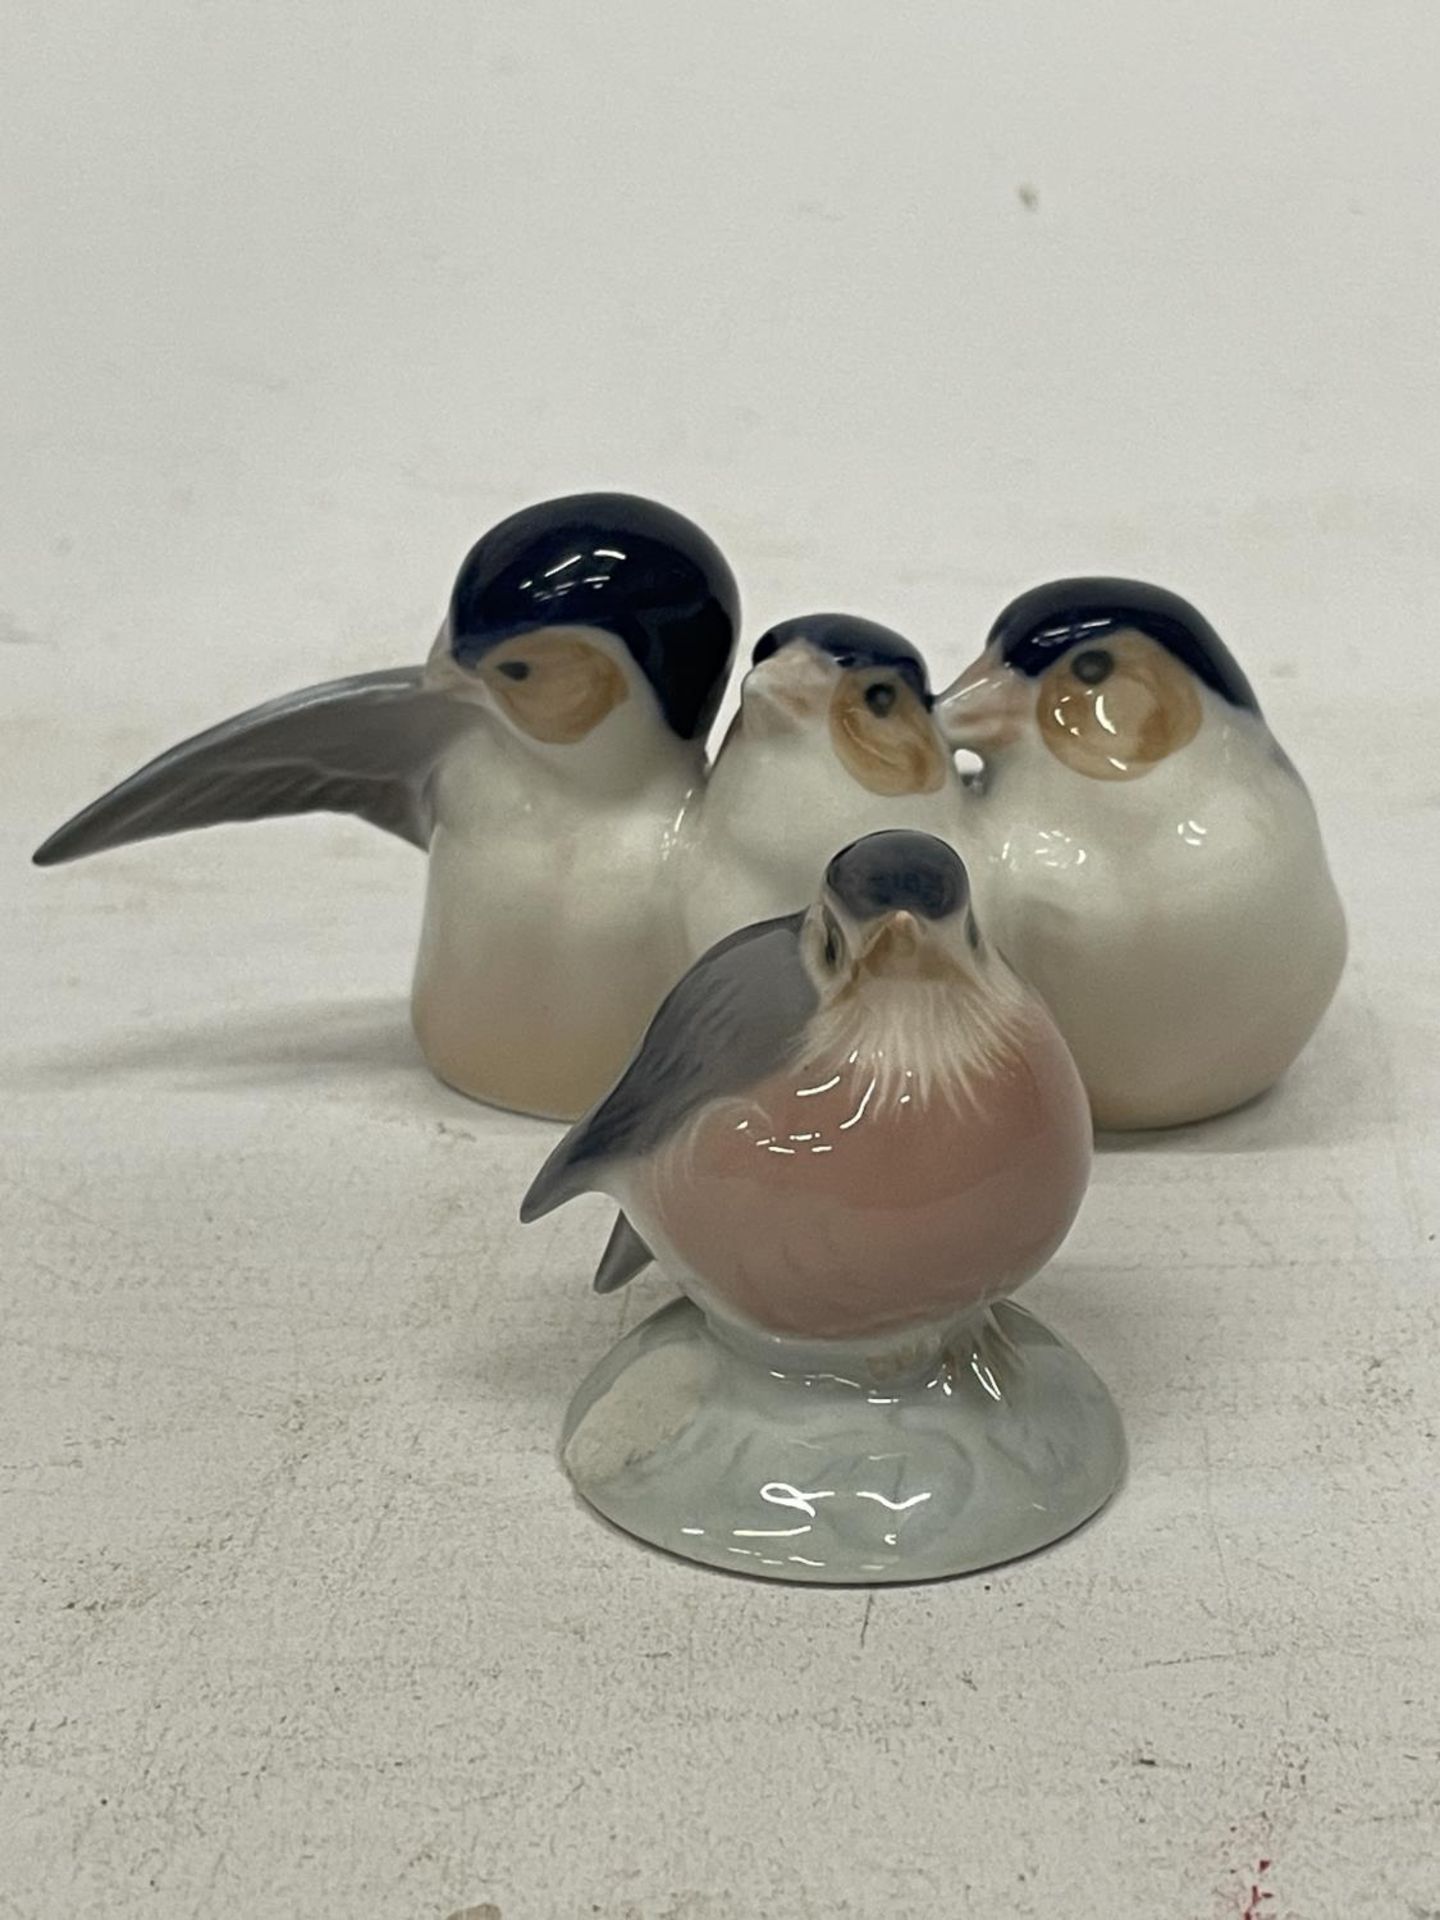 A ROYAL COPENHAGEN THREE FINCHES BIRD FIGURINE NUMBER 1045 TOGETHER WITH A BABY ROBIN - NO. 2238